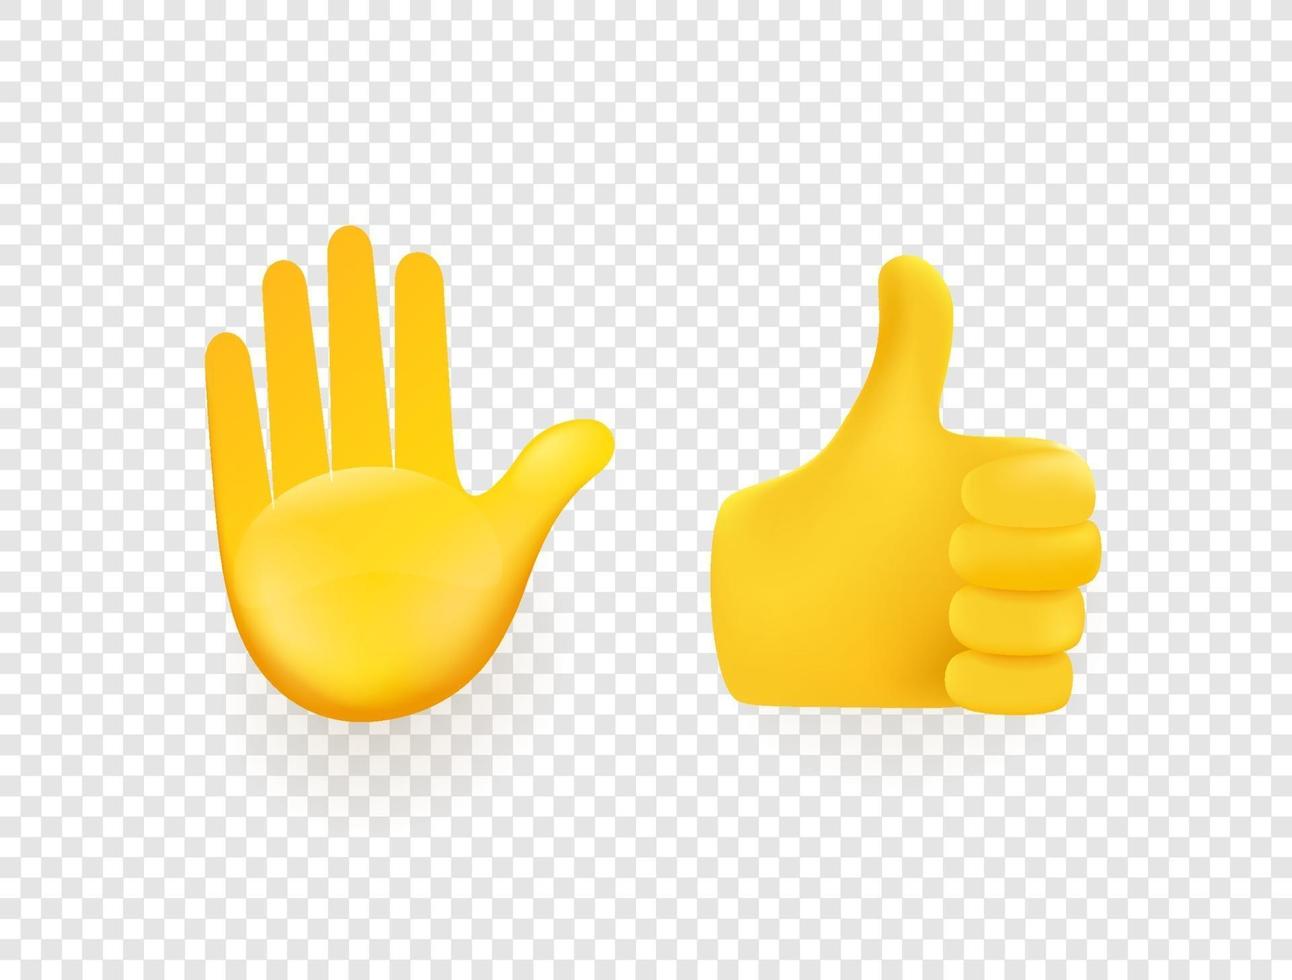 Yellow 3d vector hands isolated